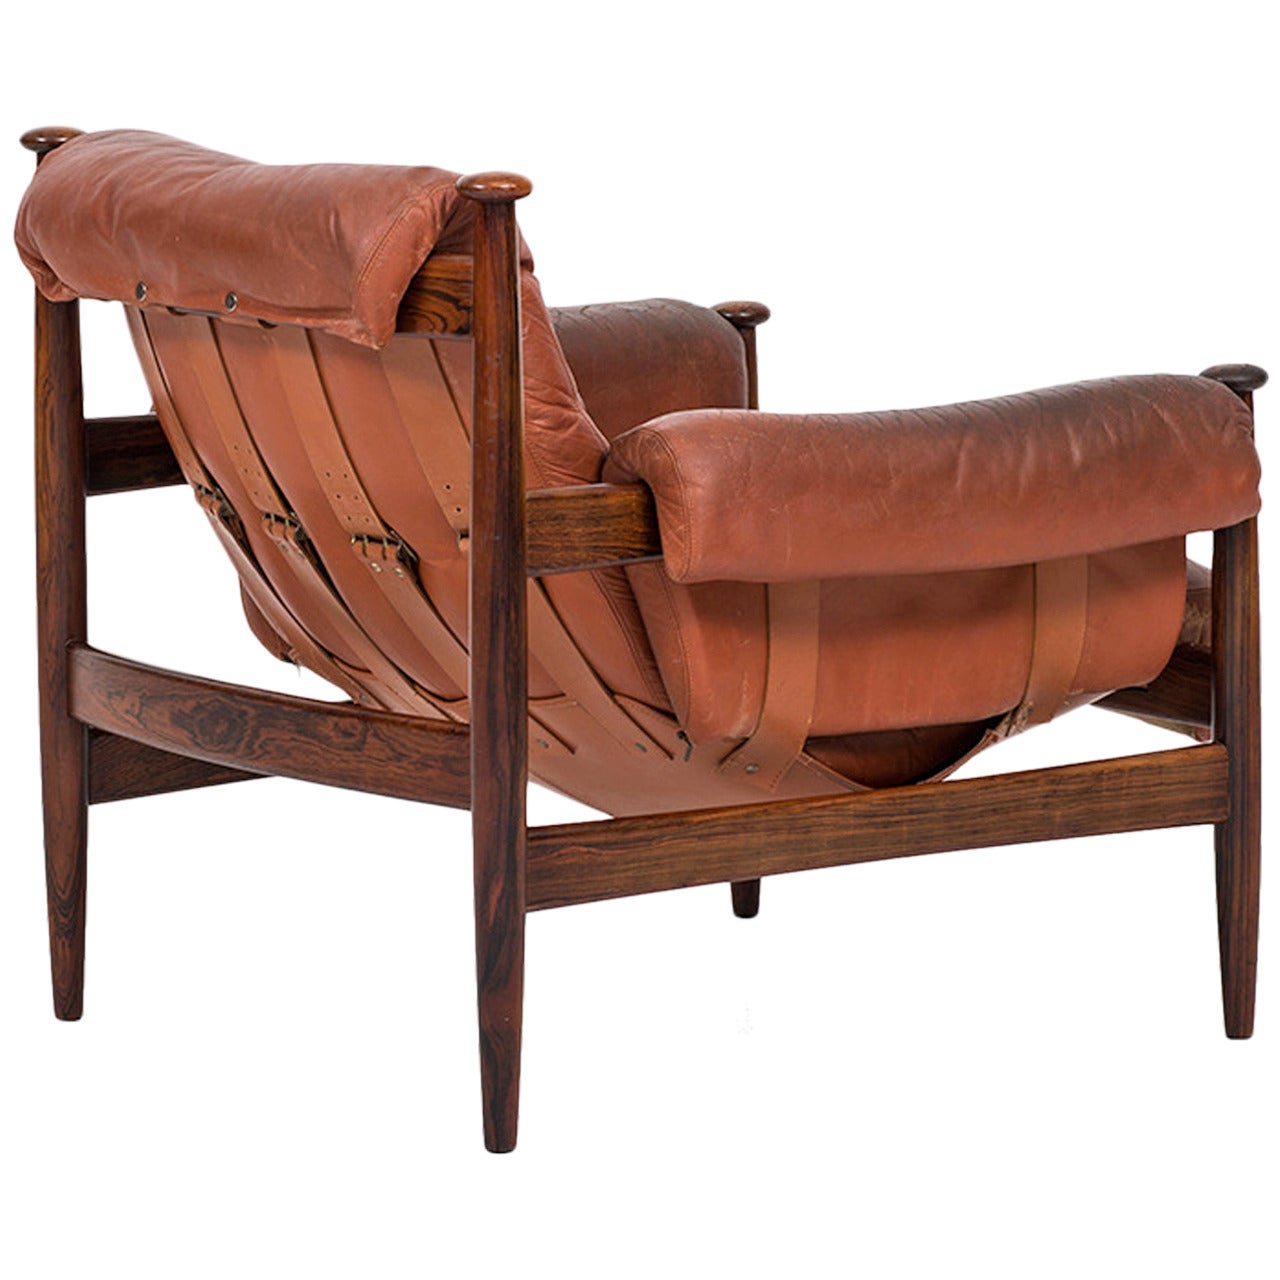 Safari chair in rosewood and red leather by Ire möbler in Sweden